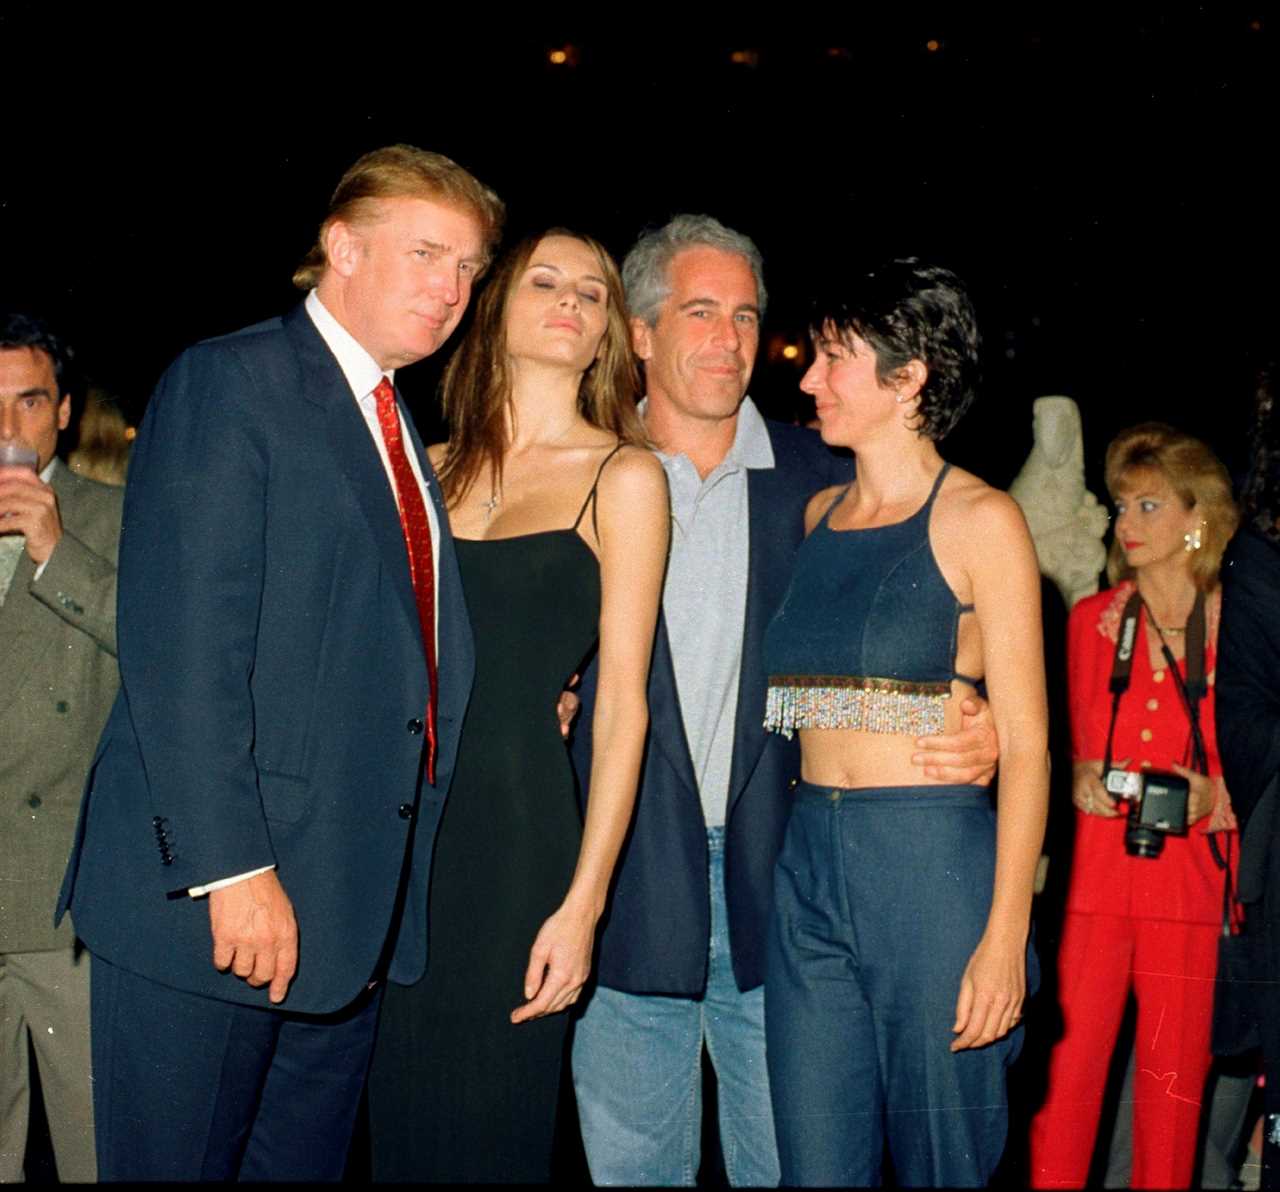 Epstein parties with Donald and Melania Trump and then girlfriend Ghislaine Maxwell